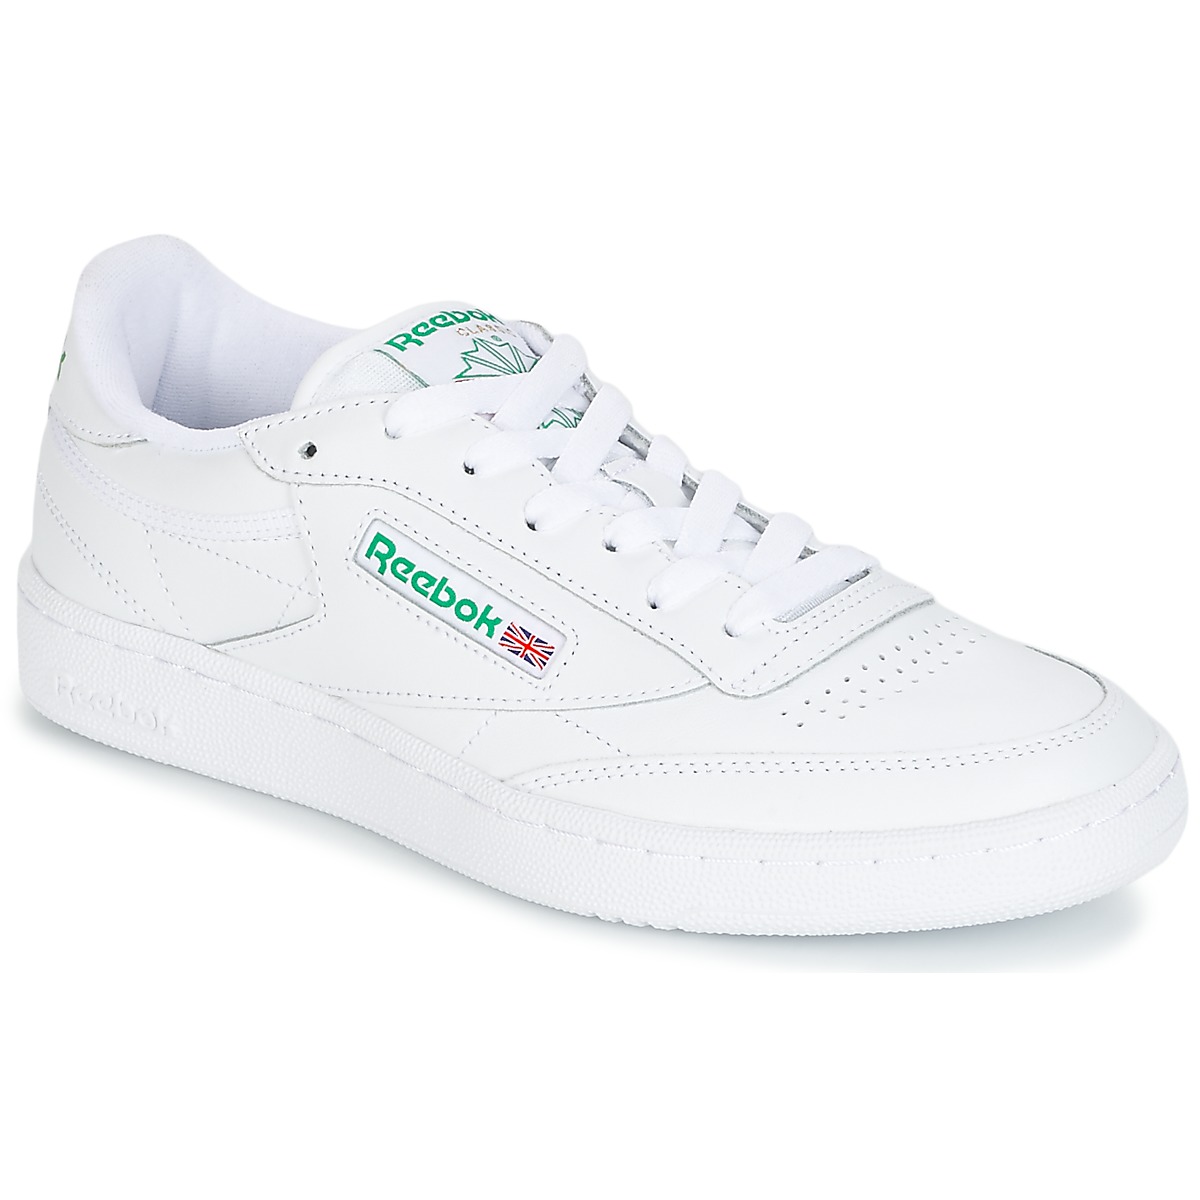 comment taille reebok classic